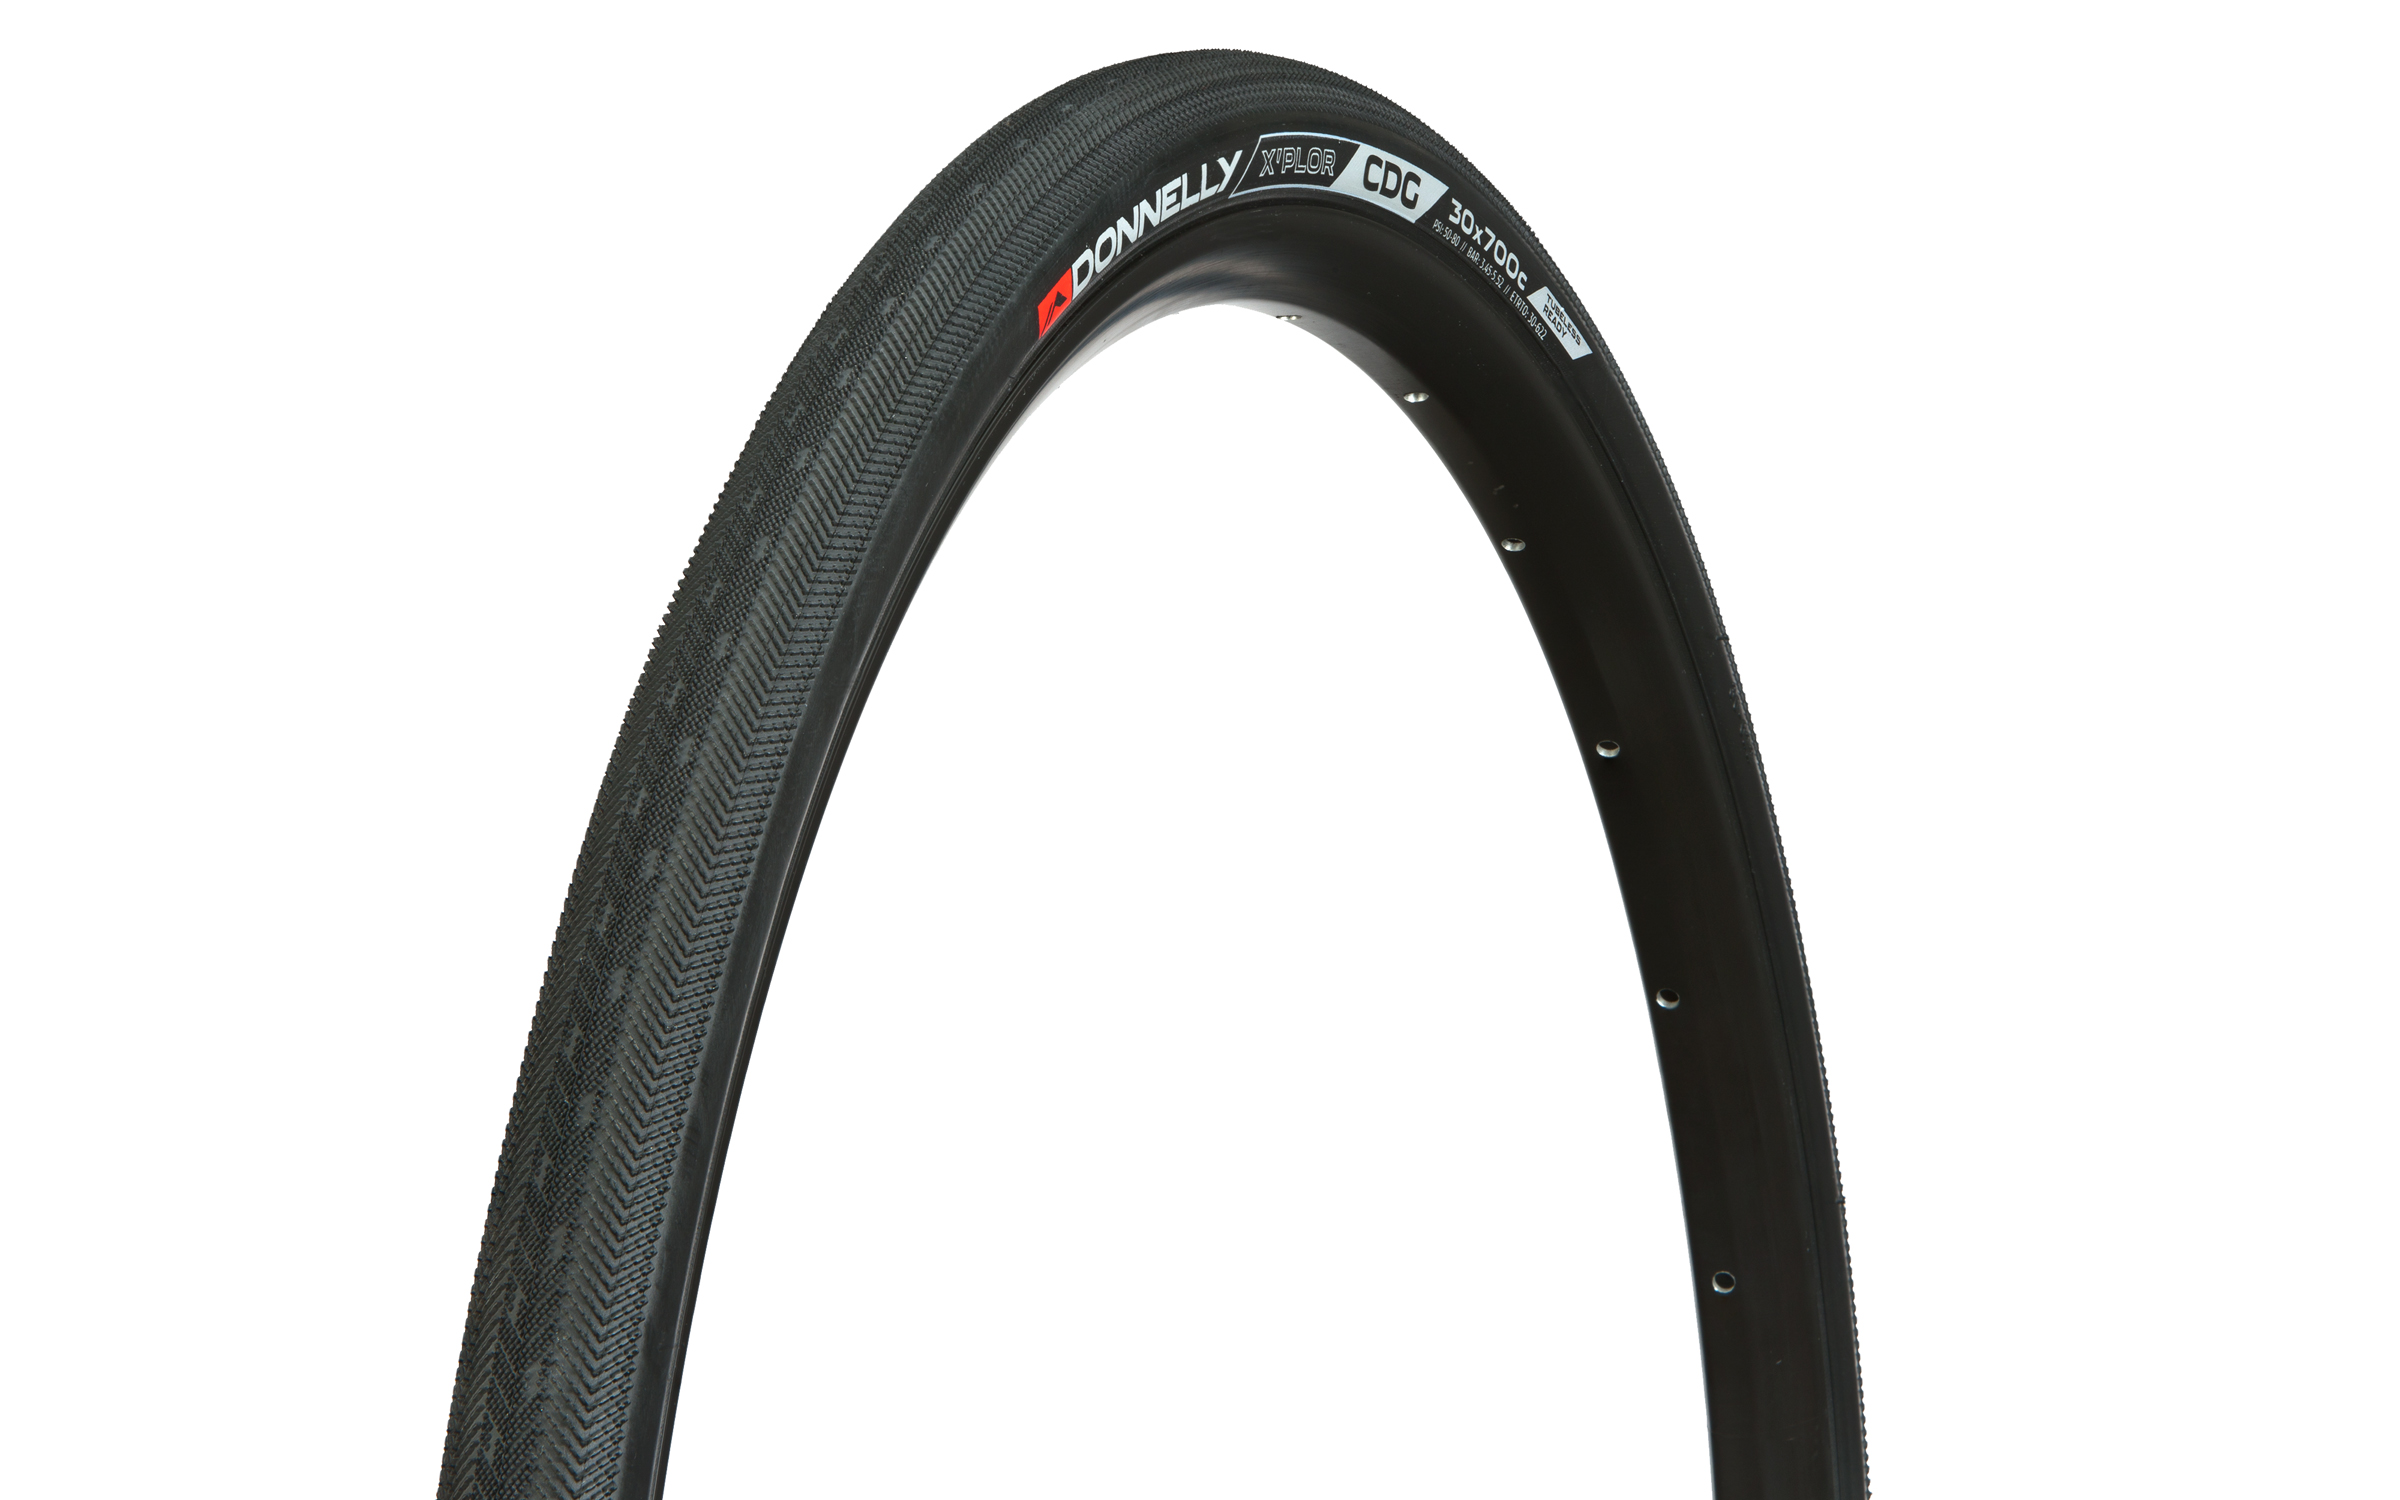 Donnelly heads into Spring Classics with new CDG mixed condition tire